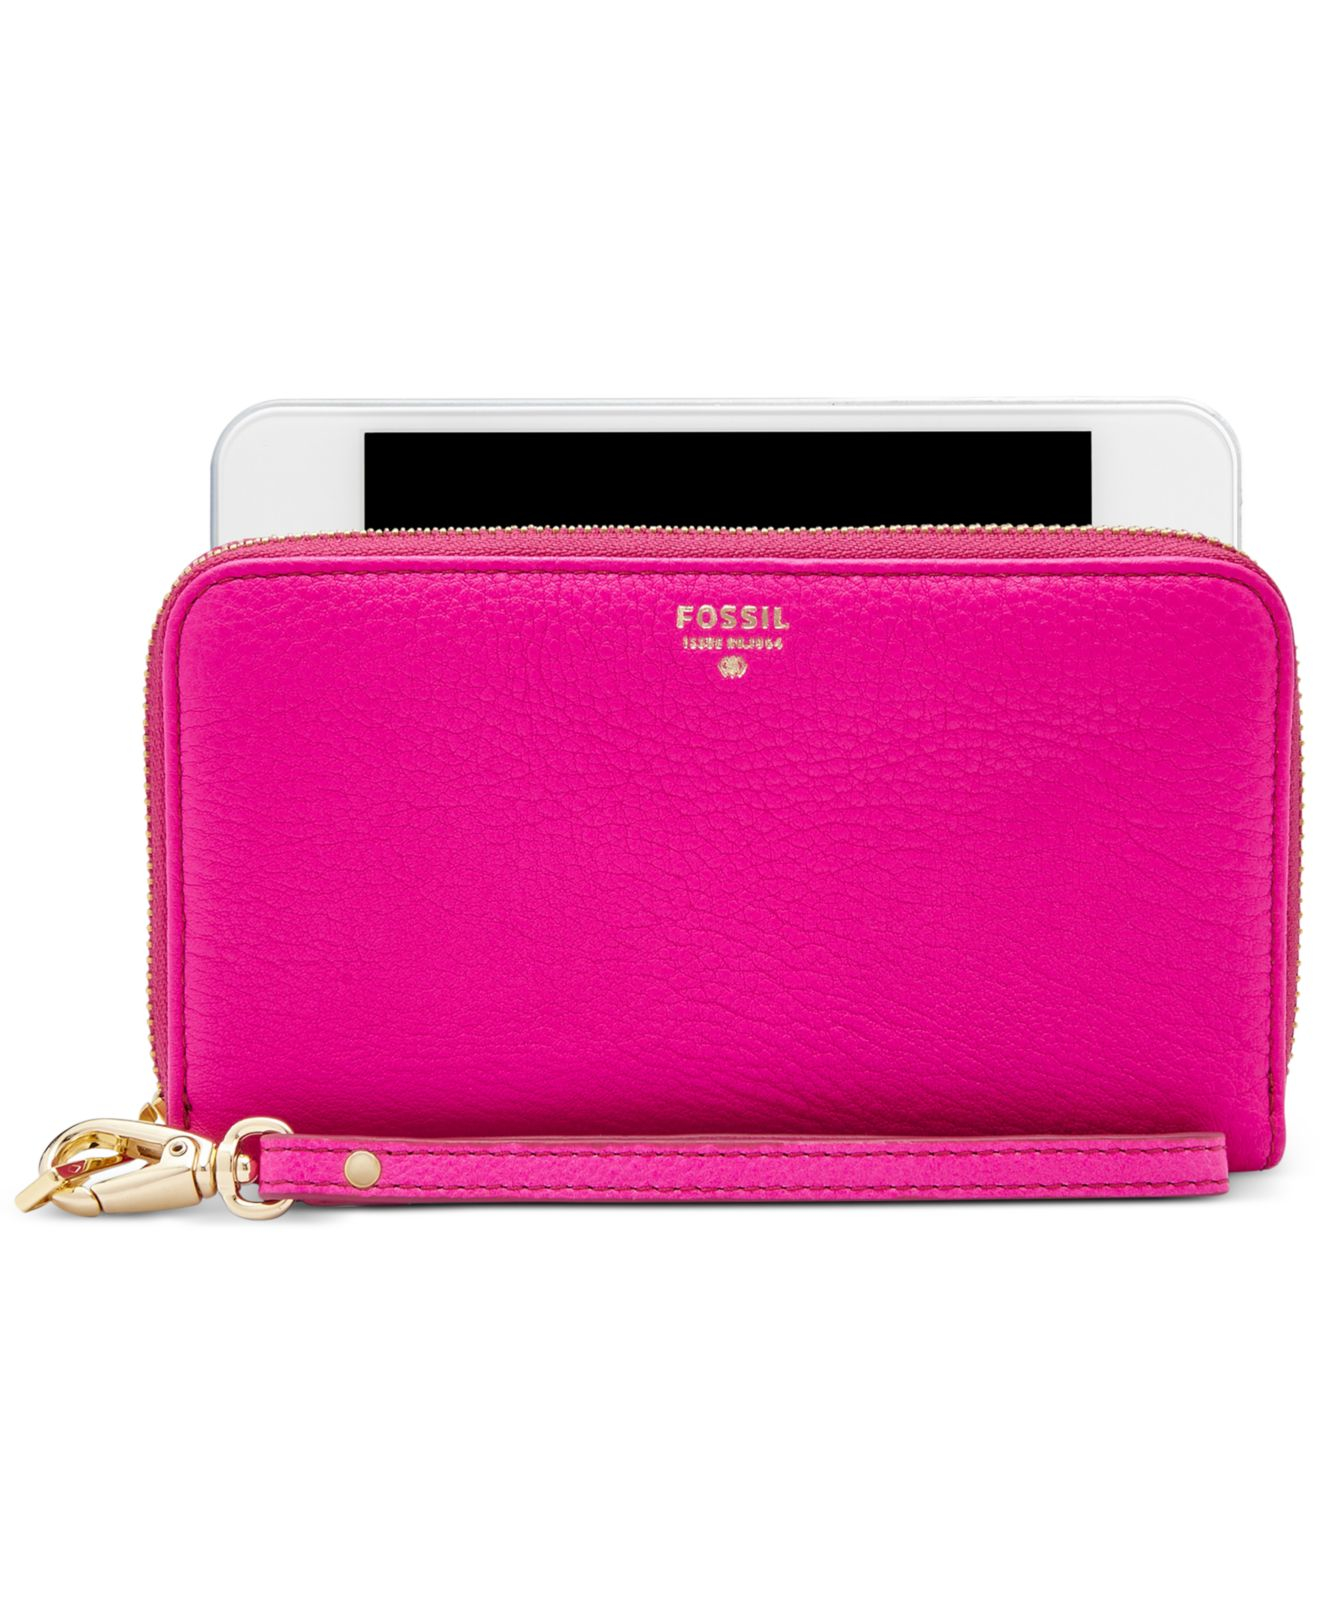 Fossil Sydney Leather Zip Phone Wallet in Pink (Hot Pink) | Lyst